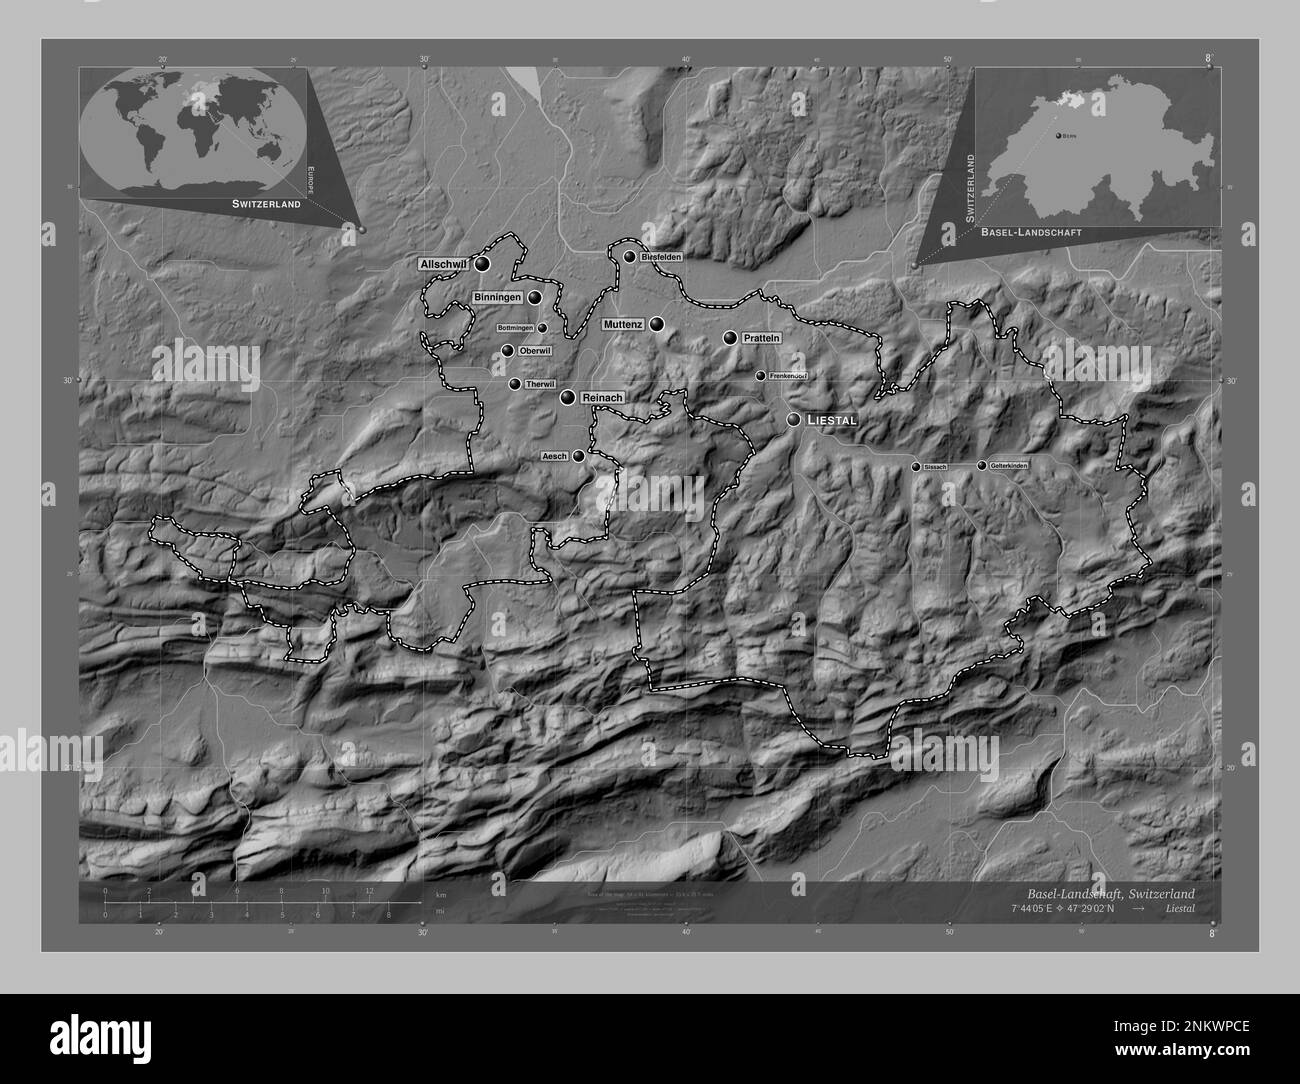 Basel-Landschaft, canton of Switzerland. Grayscale elevation map with lakes and rivers. Locations and names of major cities of the region. Corner auxi Stock Photo